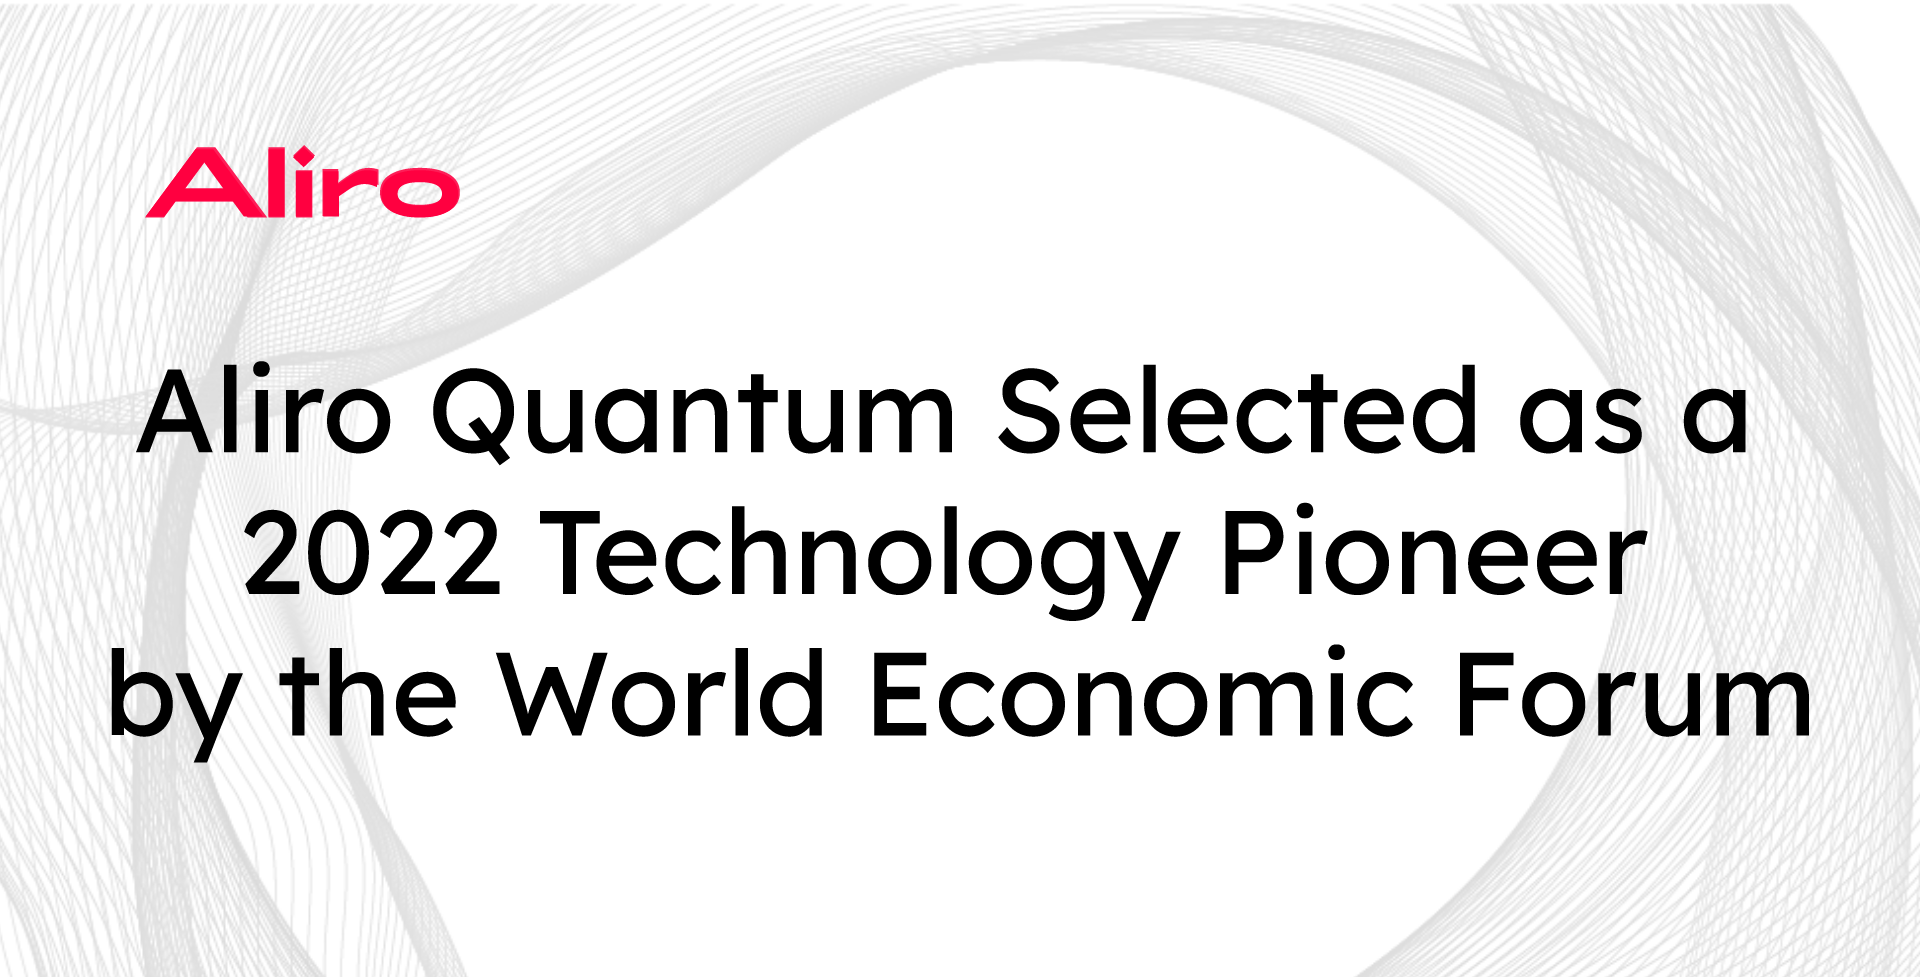 Aliro Quantum Selected as a 2022 Technology Pioneer by the World Economic Forum